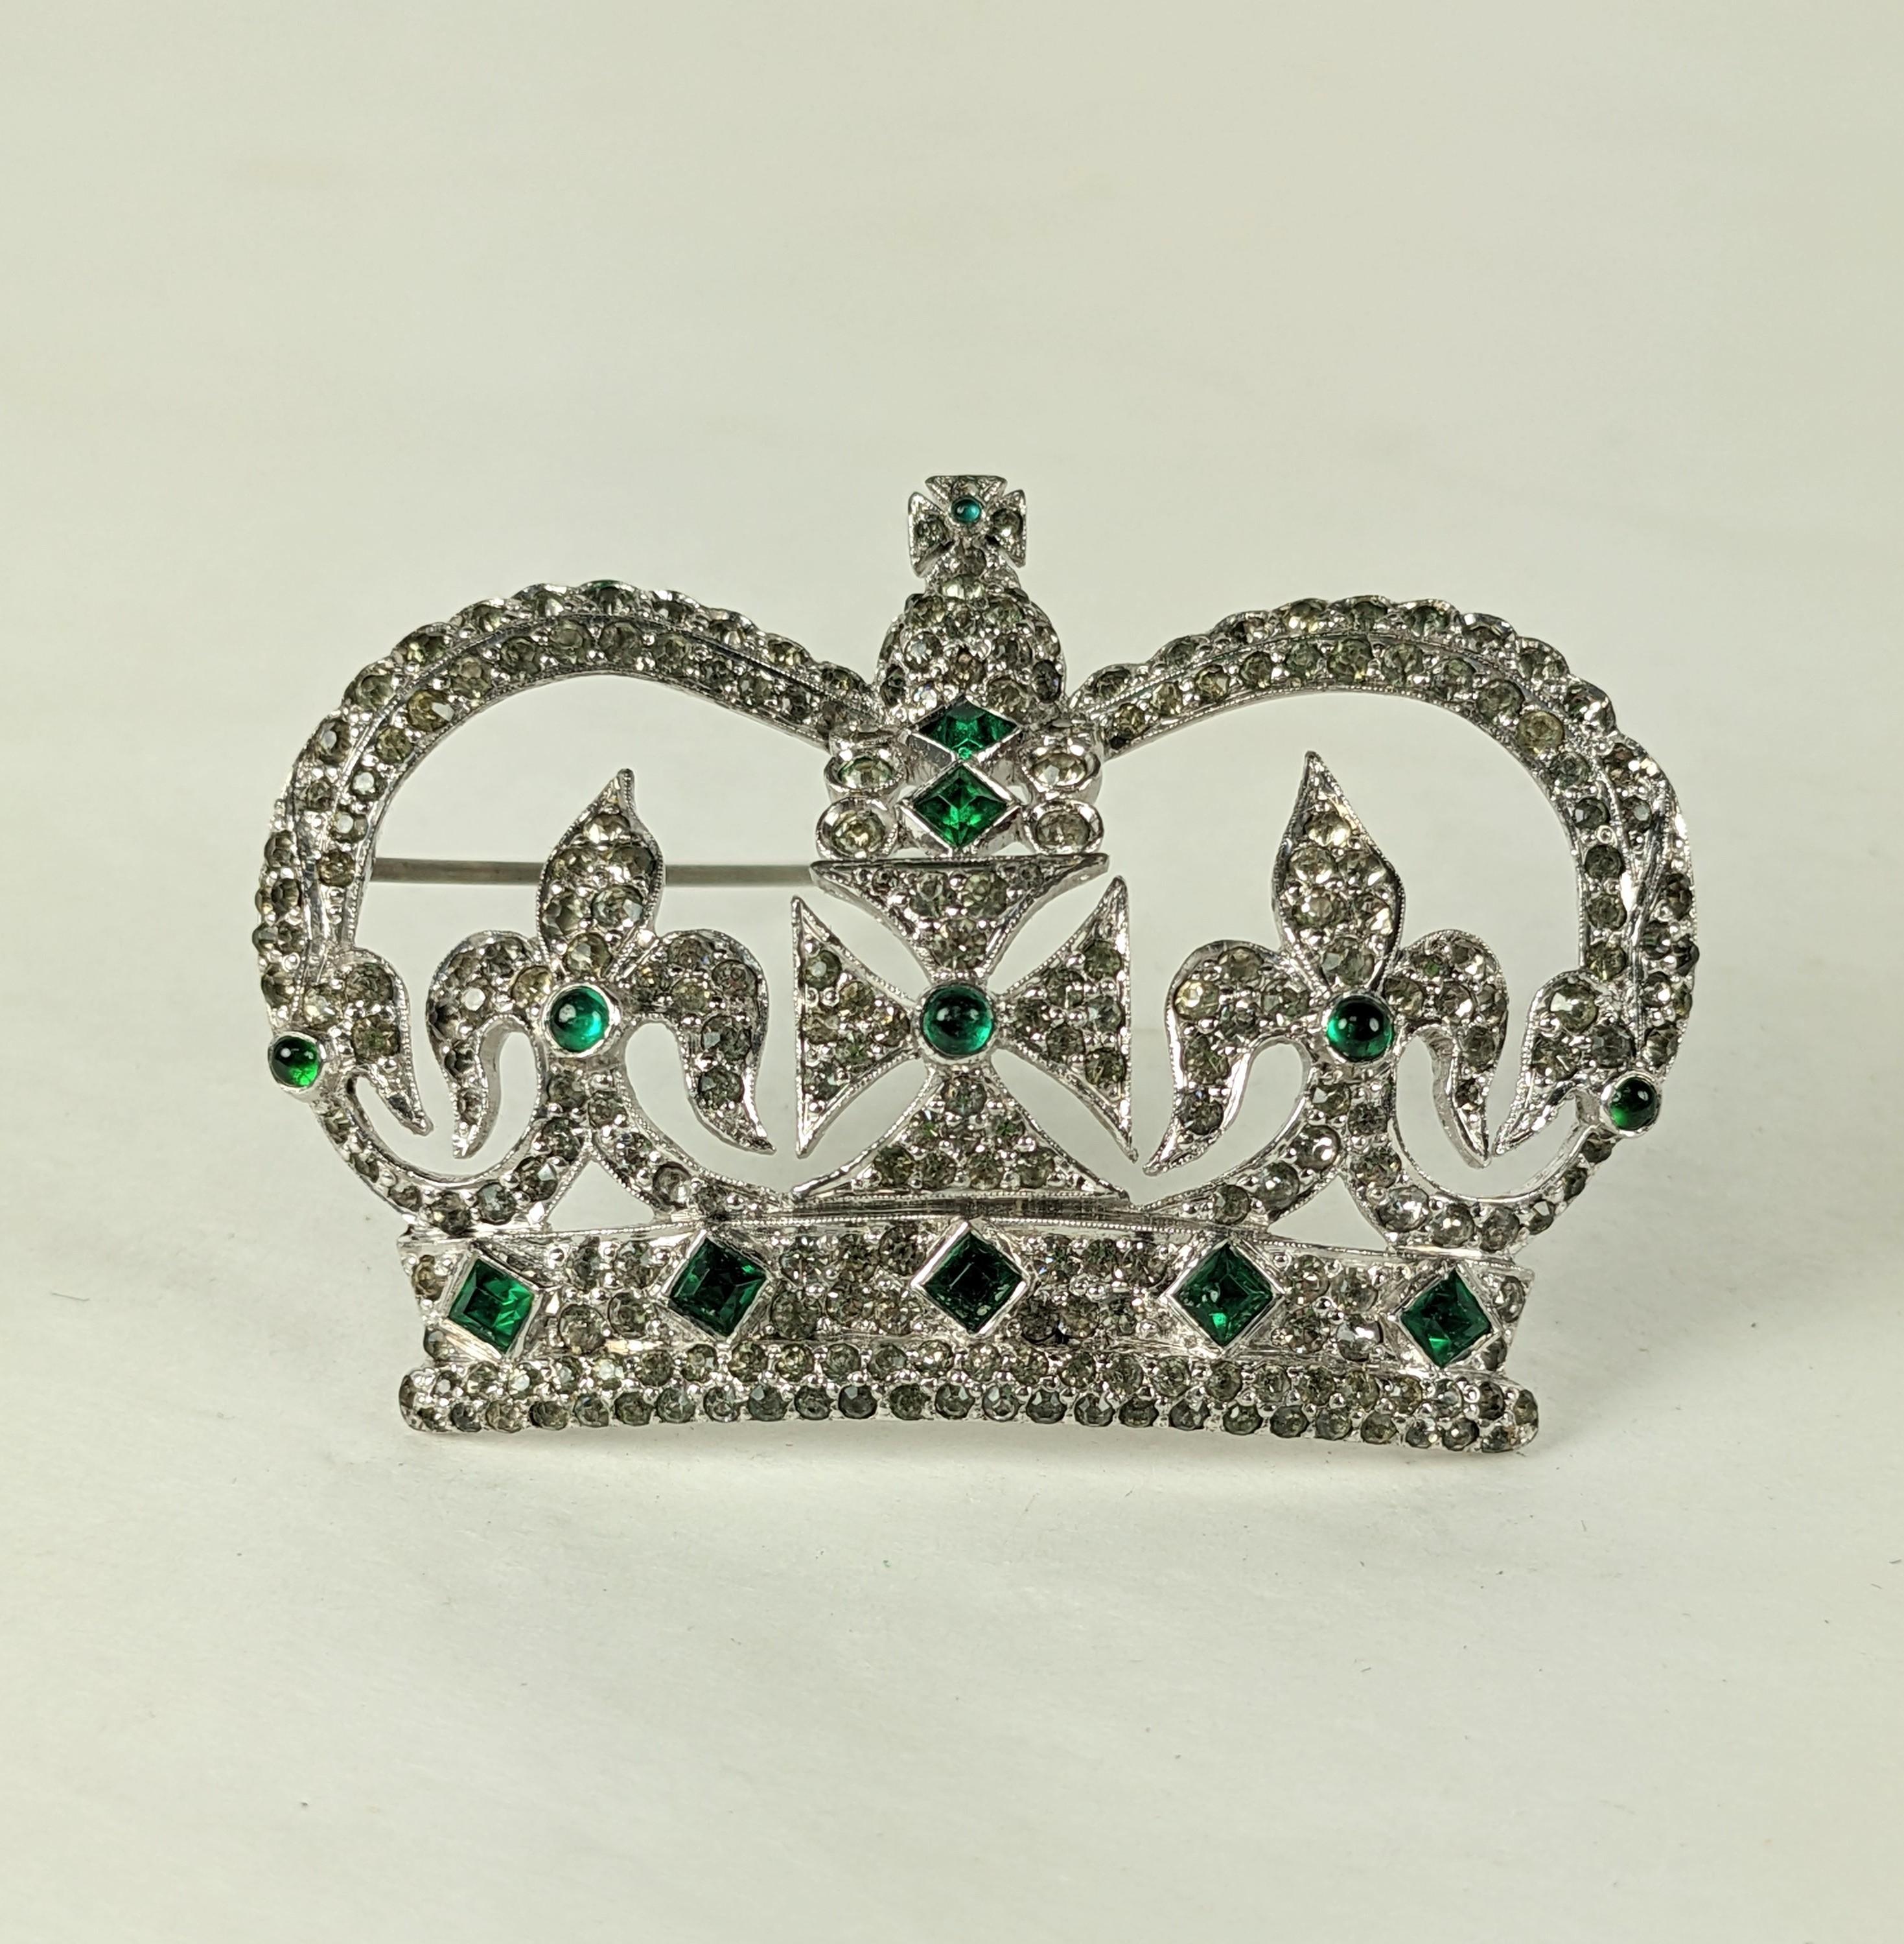 Lovely Art Deco Royal Crown Brooch, Coro. High quality manufacture set in rhodium metal with pave work, hand set with tiny emerald cabs and squares. Unsigned. 1930's USA. 2.5